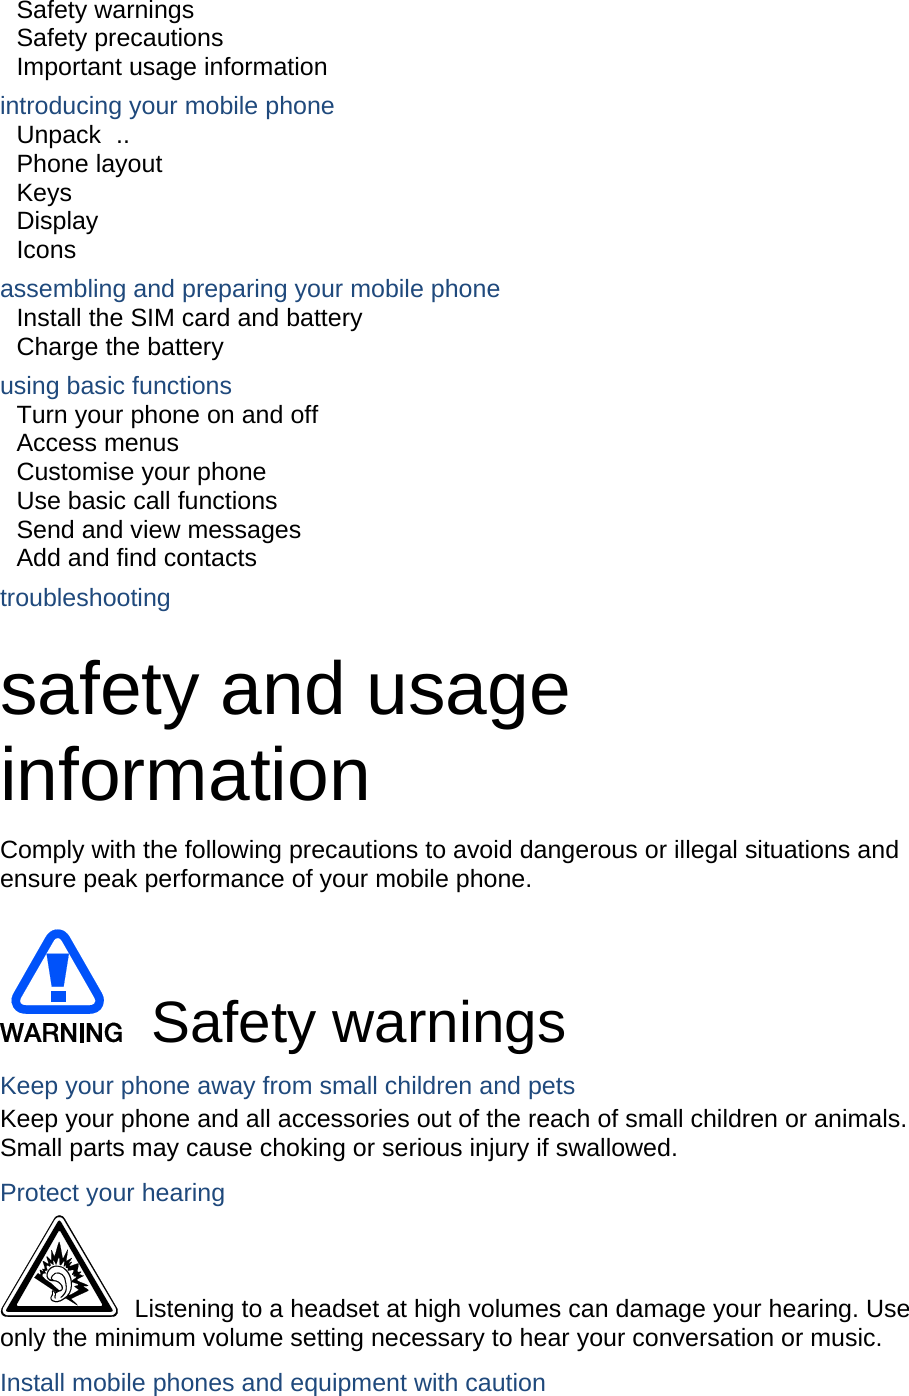   Safety warnings     Safety precautions     Important usage information     introducing your mobile phone     Unpack ..  Phone layout     Keys  Display  Icons assembling and preparing your mobile phone     Install the SIM card and battery     Charge the battery     using basic functions    Turn your phone on and off    Access menus     Customise your phone     Use basic call functions     Send and view messages     Add and find contacts     troubleshooting     safety and usage information  Comply with the following precautions to avoid dangerous or illegal situations and ensure peak performance of your mobile phone.   Safety warnings Keep your phone away from small children and pets Keep your phone and all accessories out of the reach of small children or animals. Small parts may cause choking or serious injury if swallowed. Protect your hearing   Listening to a headset at high volumes can damage your hearing. Use only the minimum volume setting necessary to hear your conversation or music. Install mobile phones and equipment with caution 